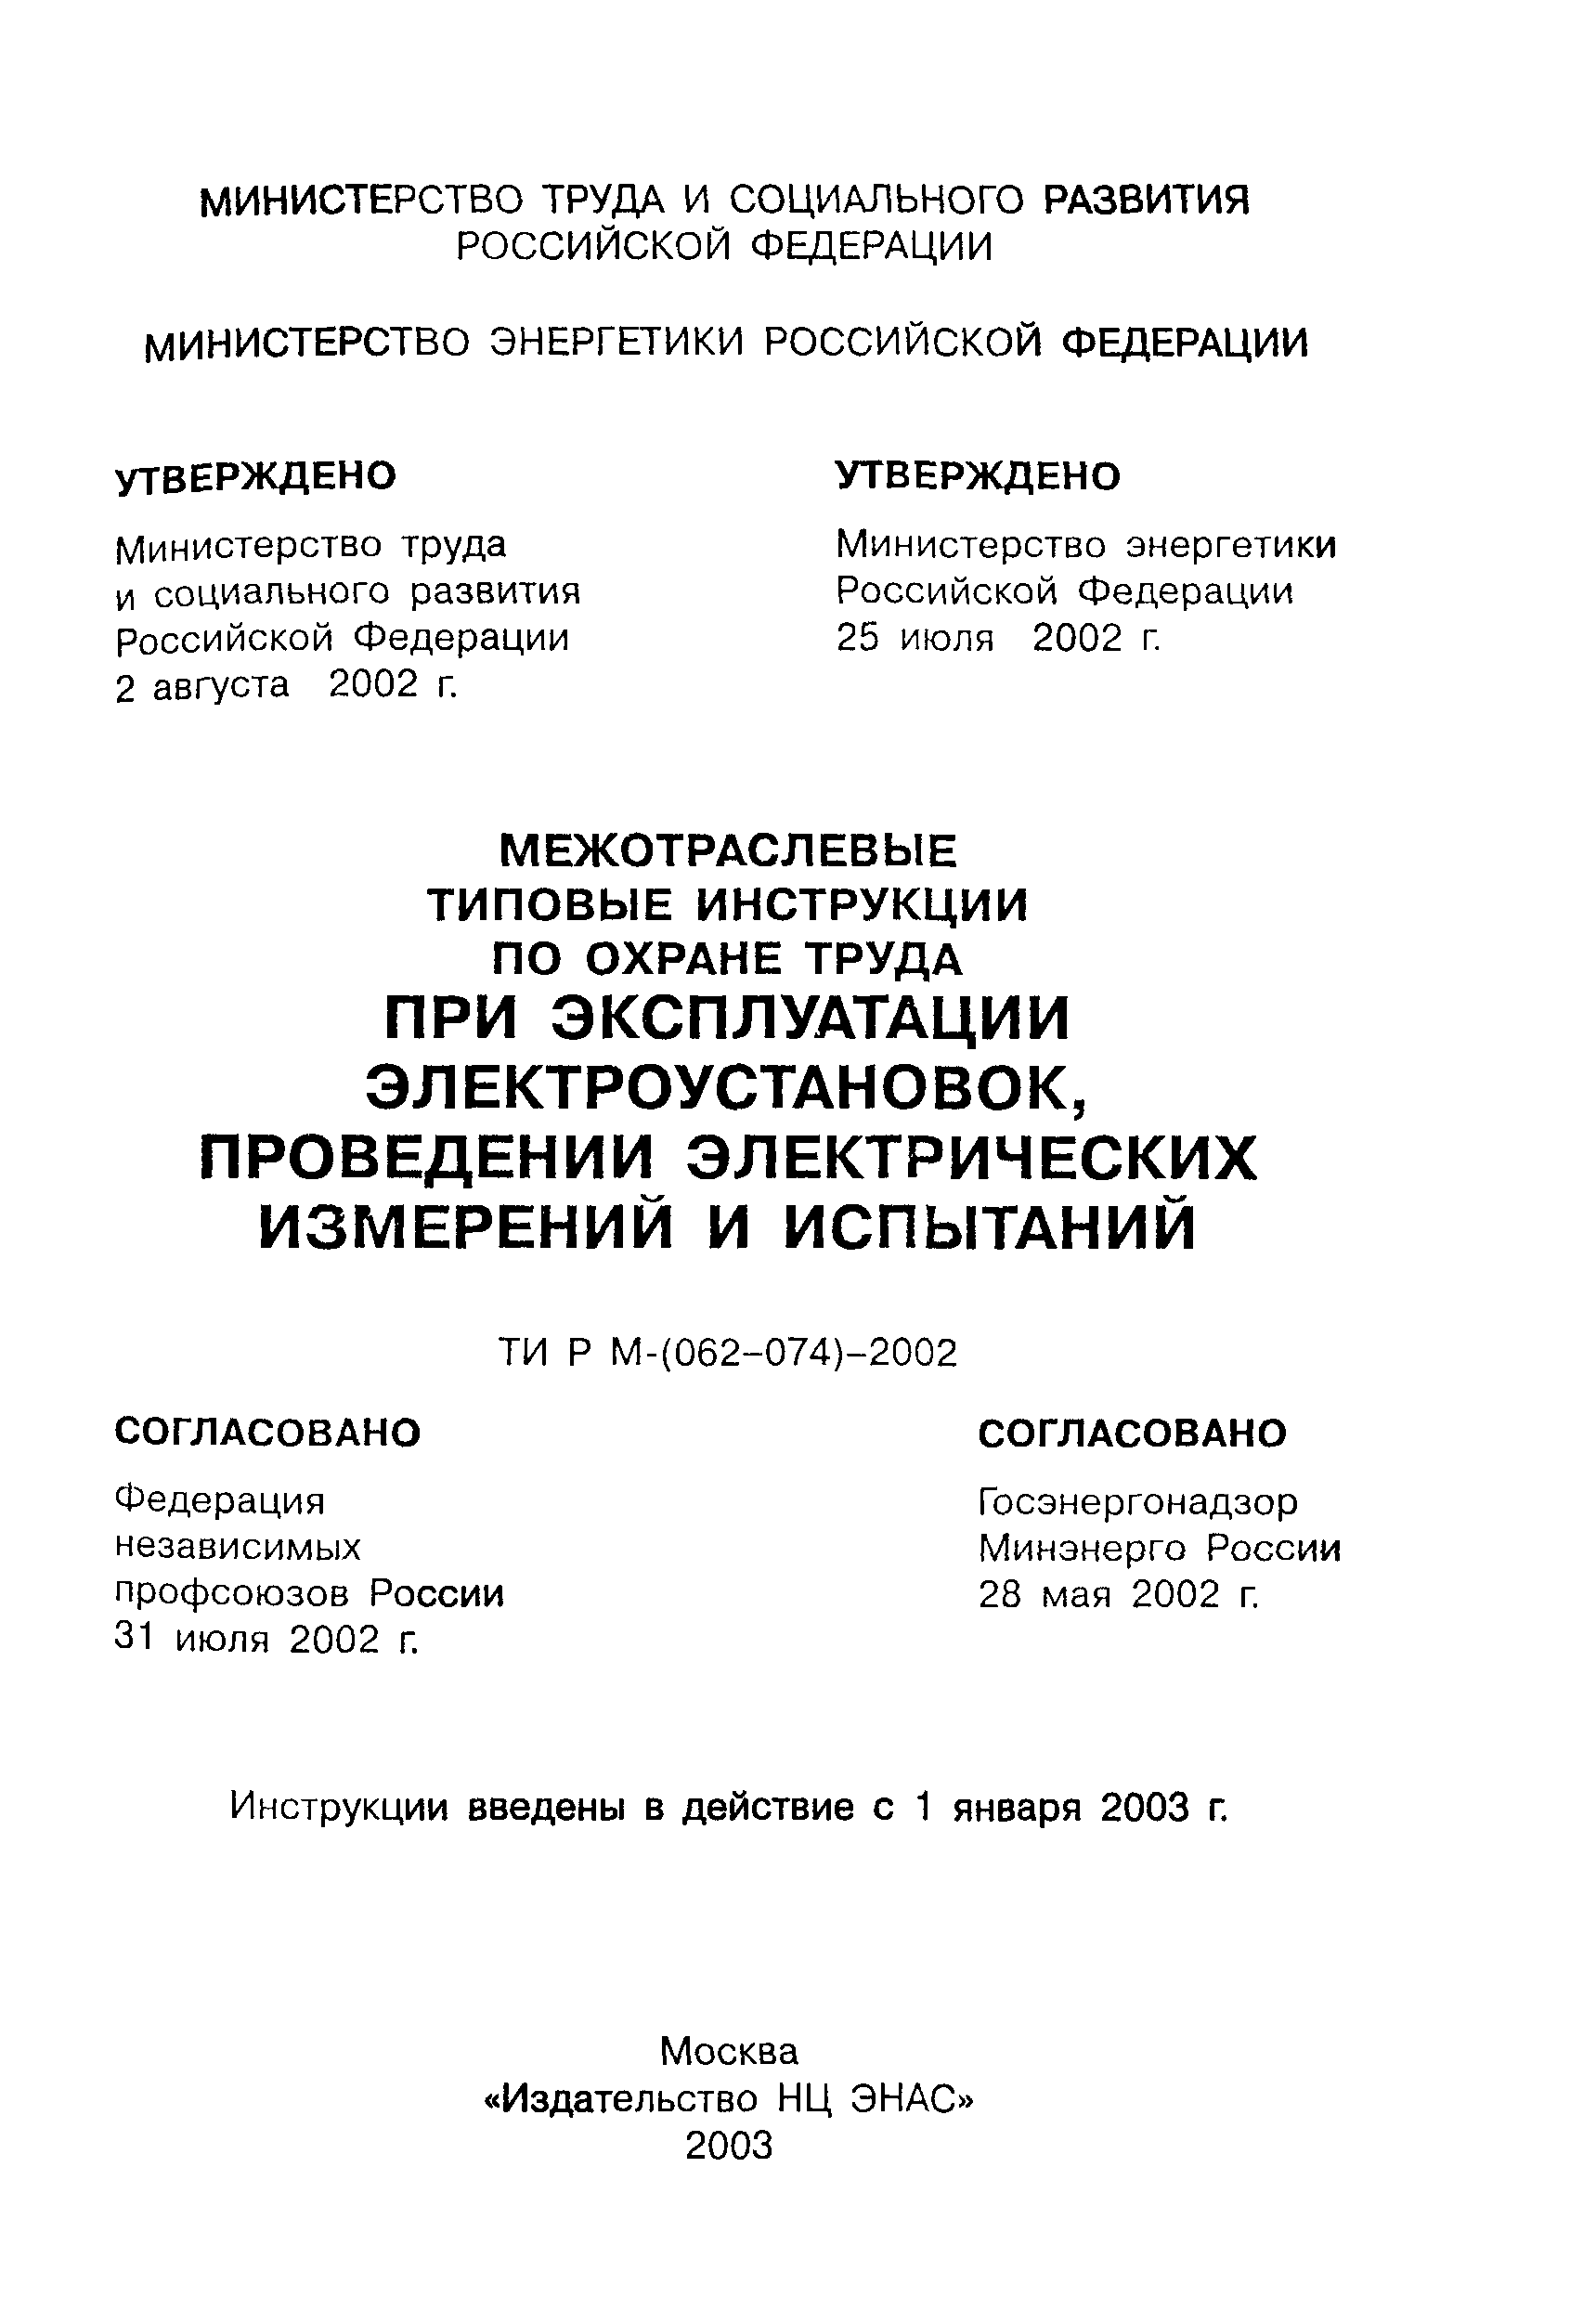 ТИ Р М-071-2002